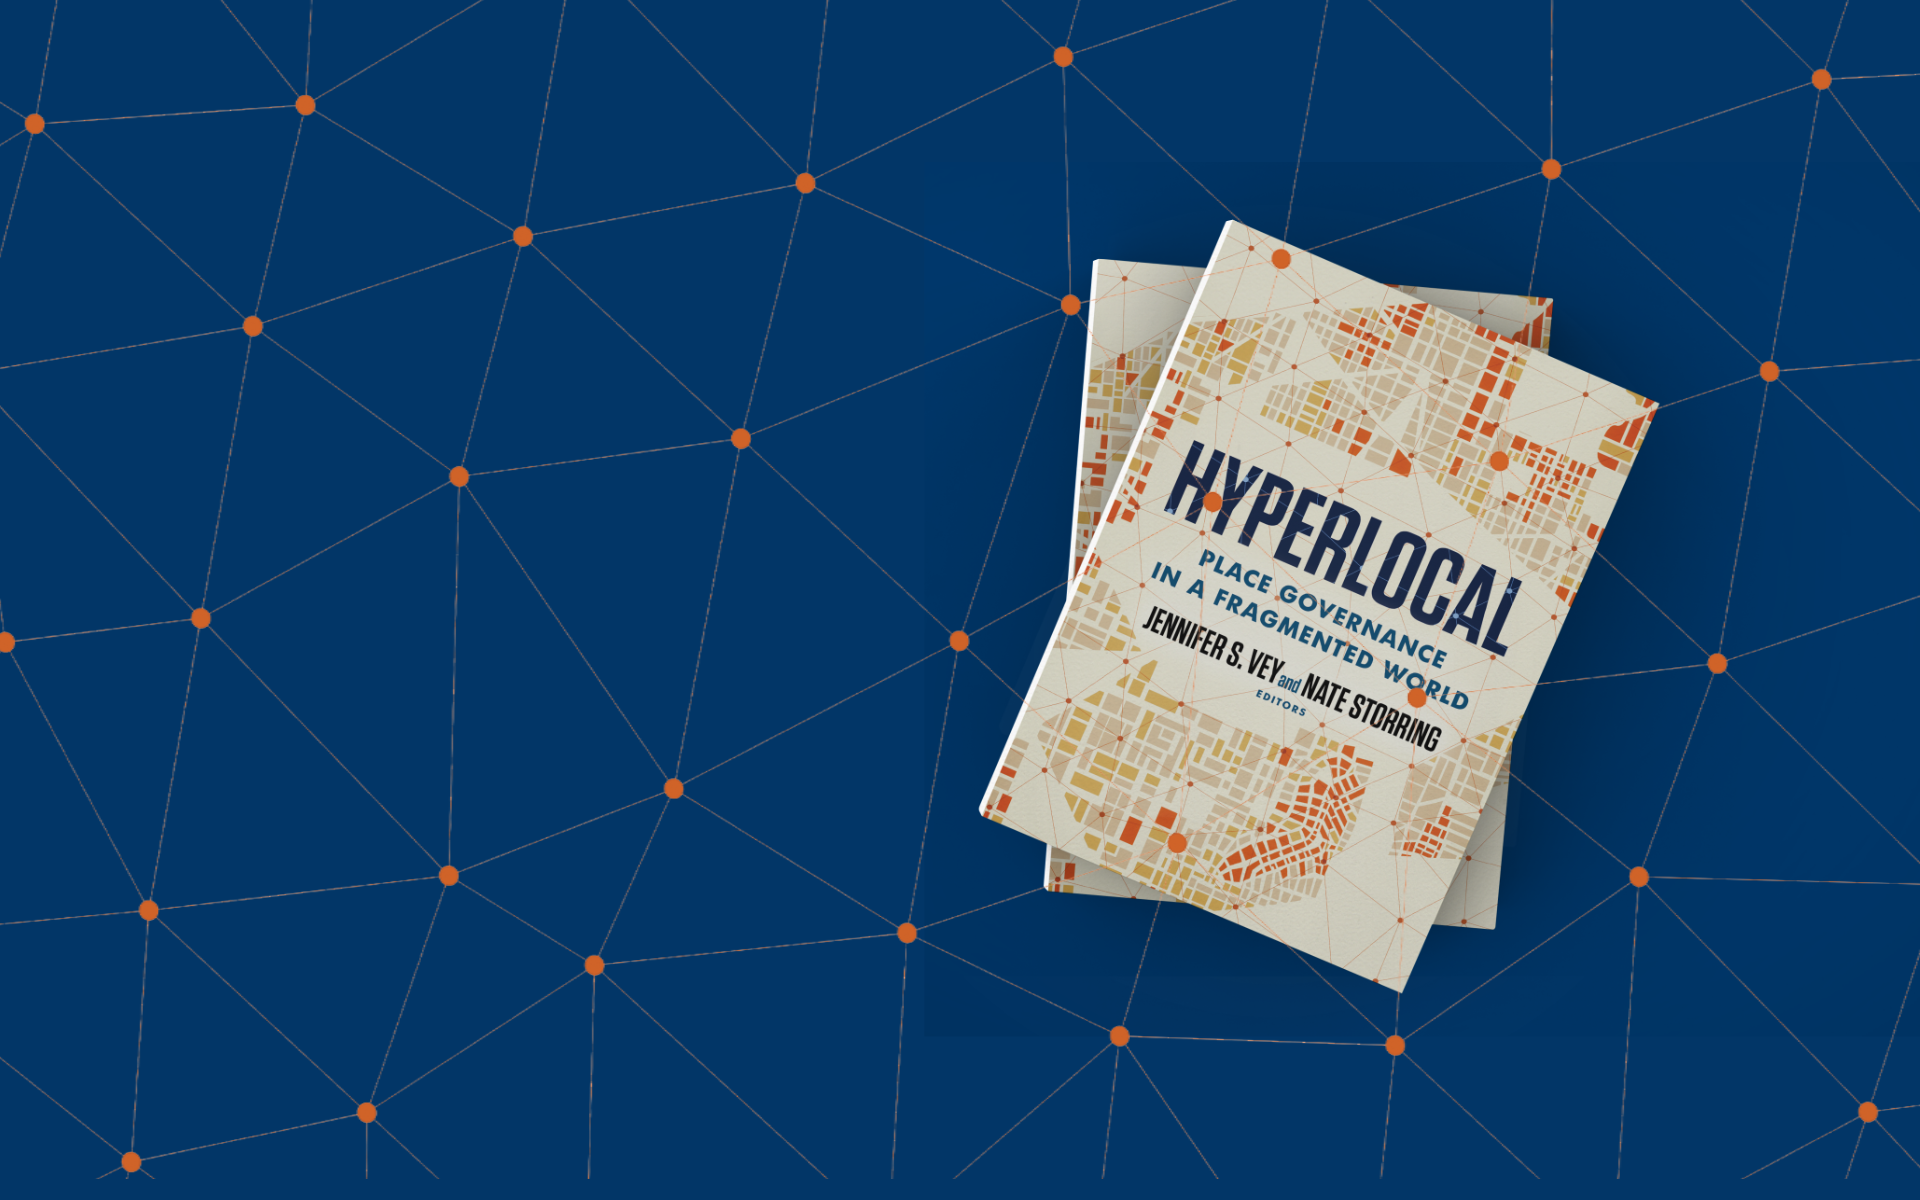 Introducing Hyperlocal: Place Governance in a Fragmented World